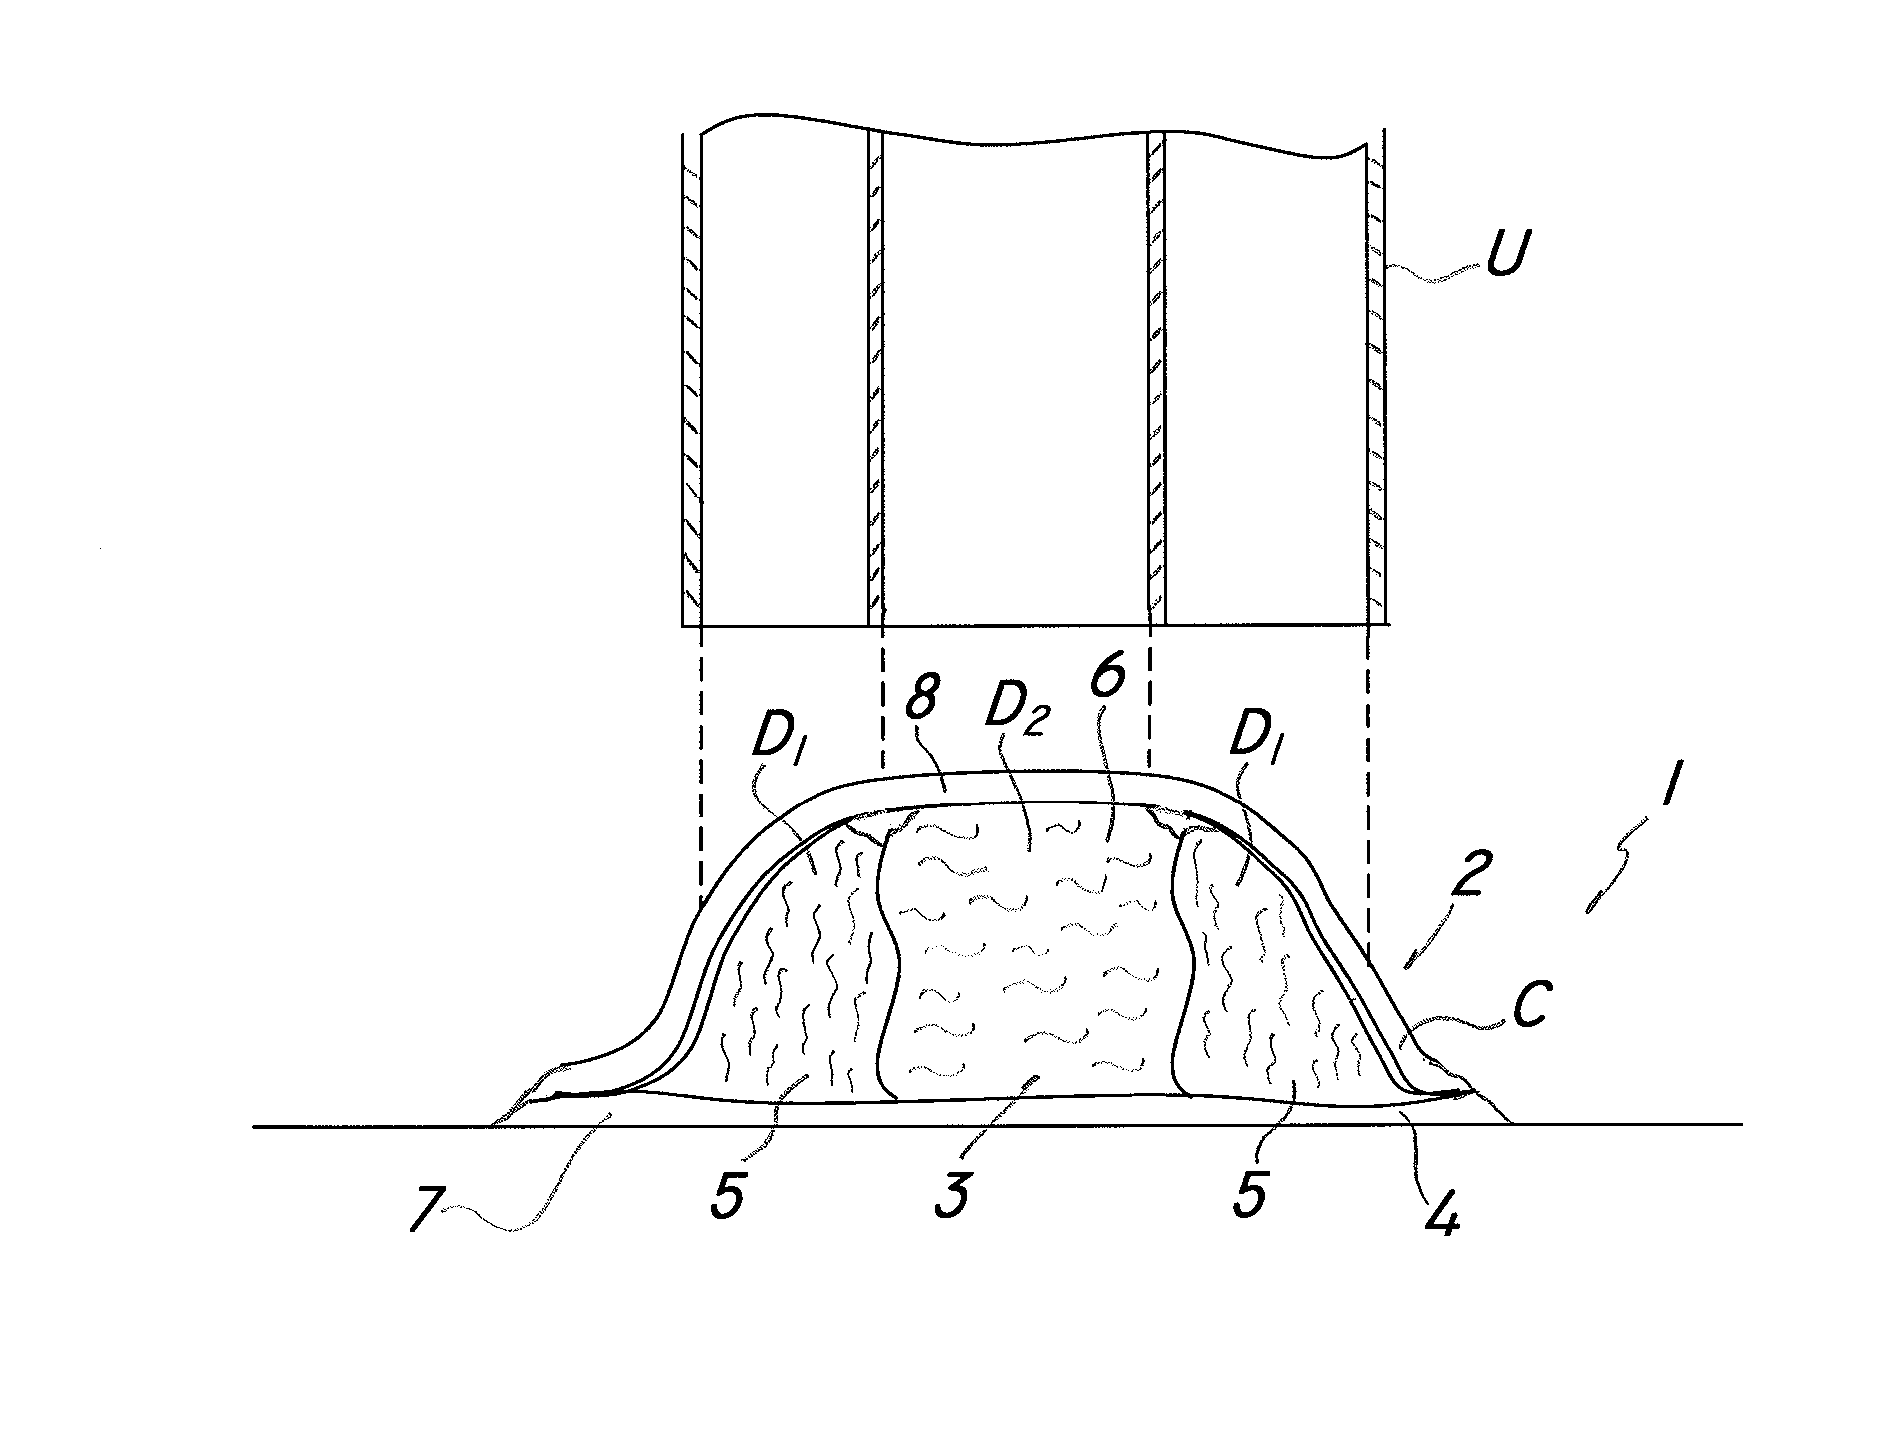 Filled food product and method of producing such food product